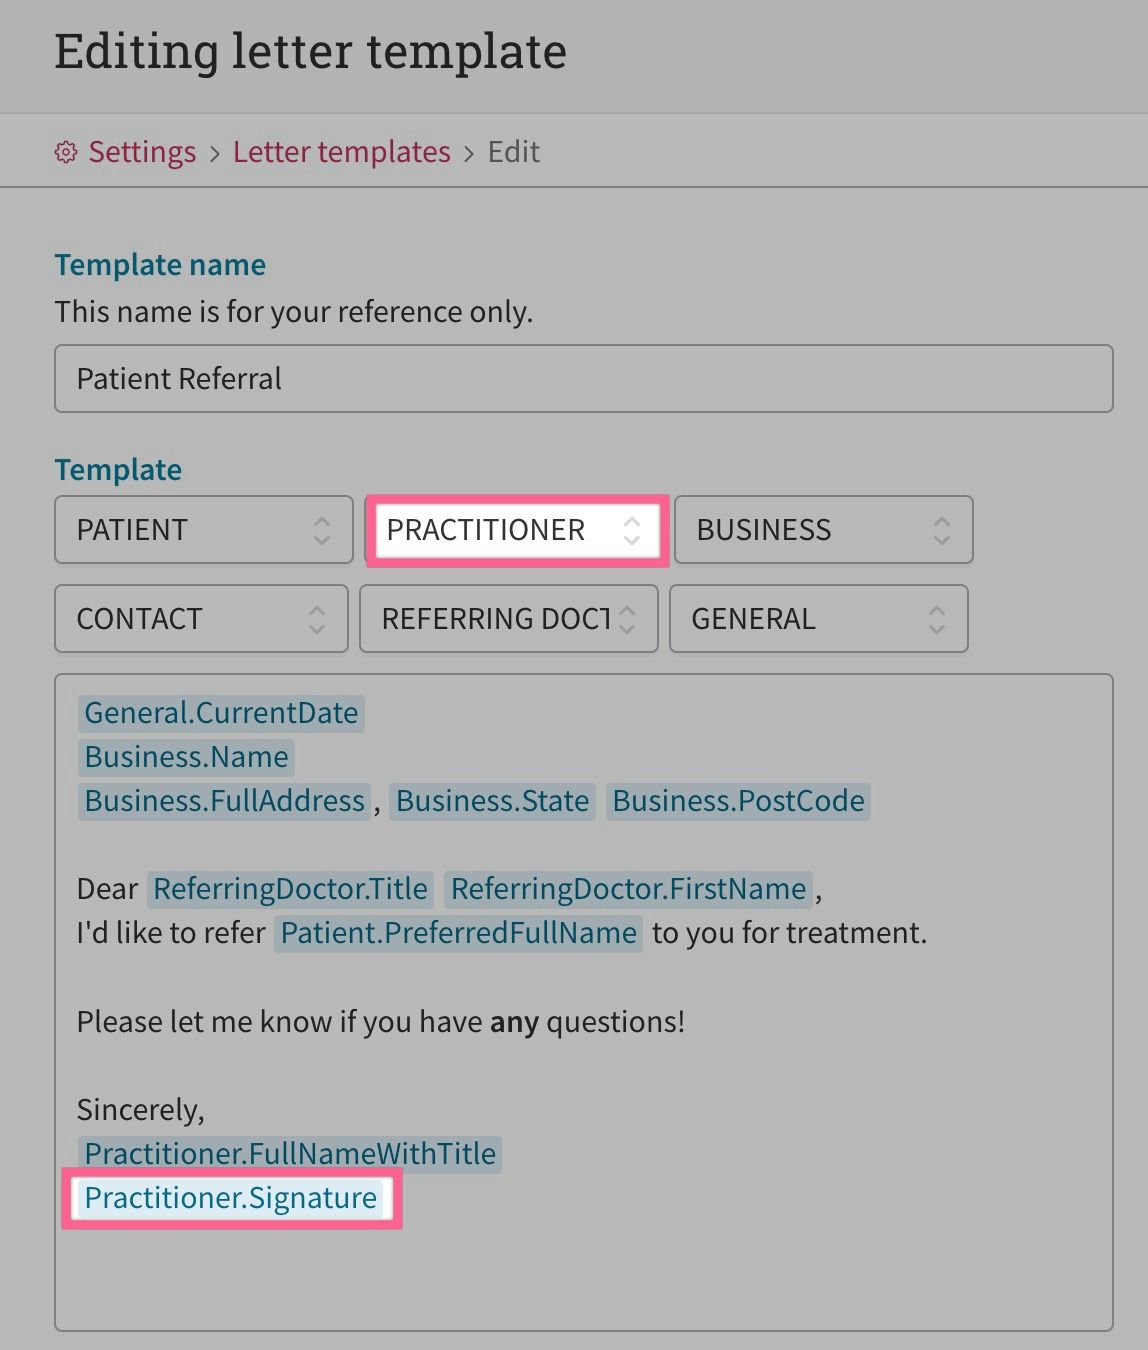 Practitioner signature setting placeholder